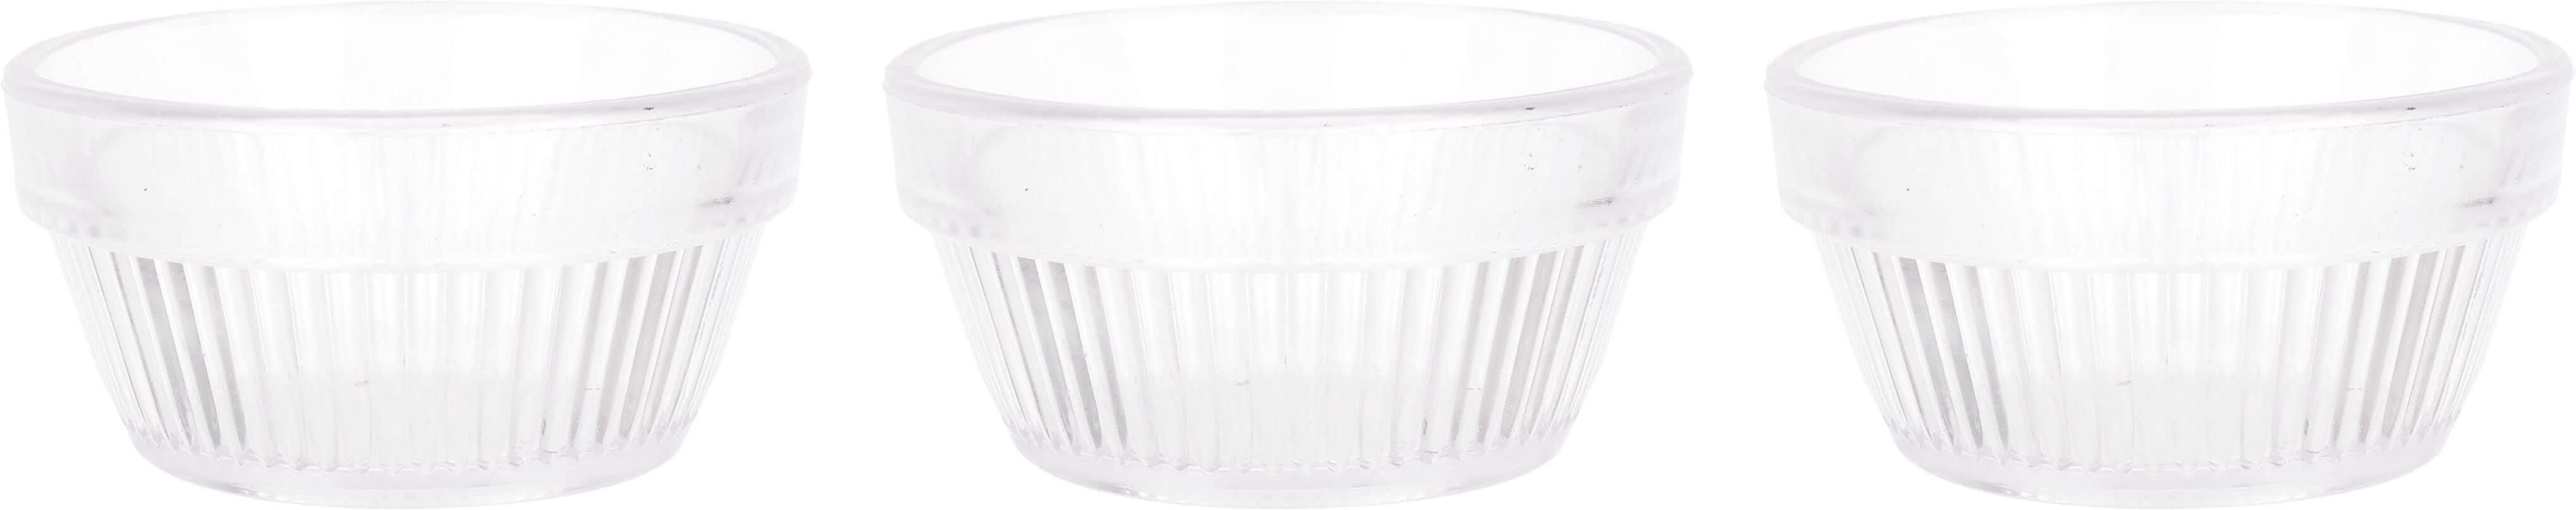 Get Fouad Acrylic Bowl Set, 3 Pieces, 8×5 cm - Clear with best offers | Raneen.com